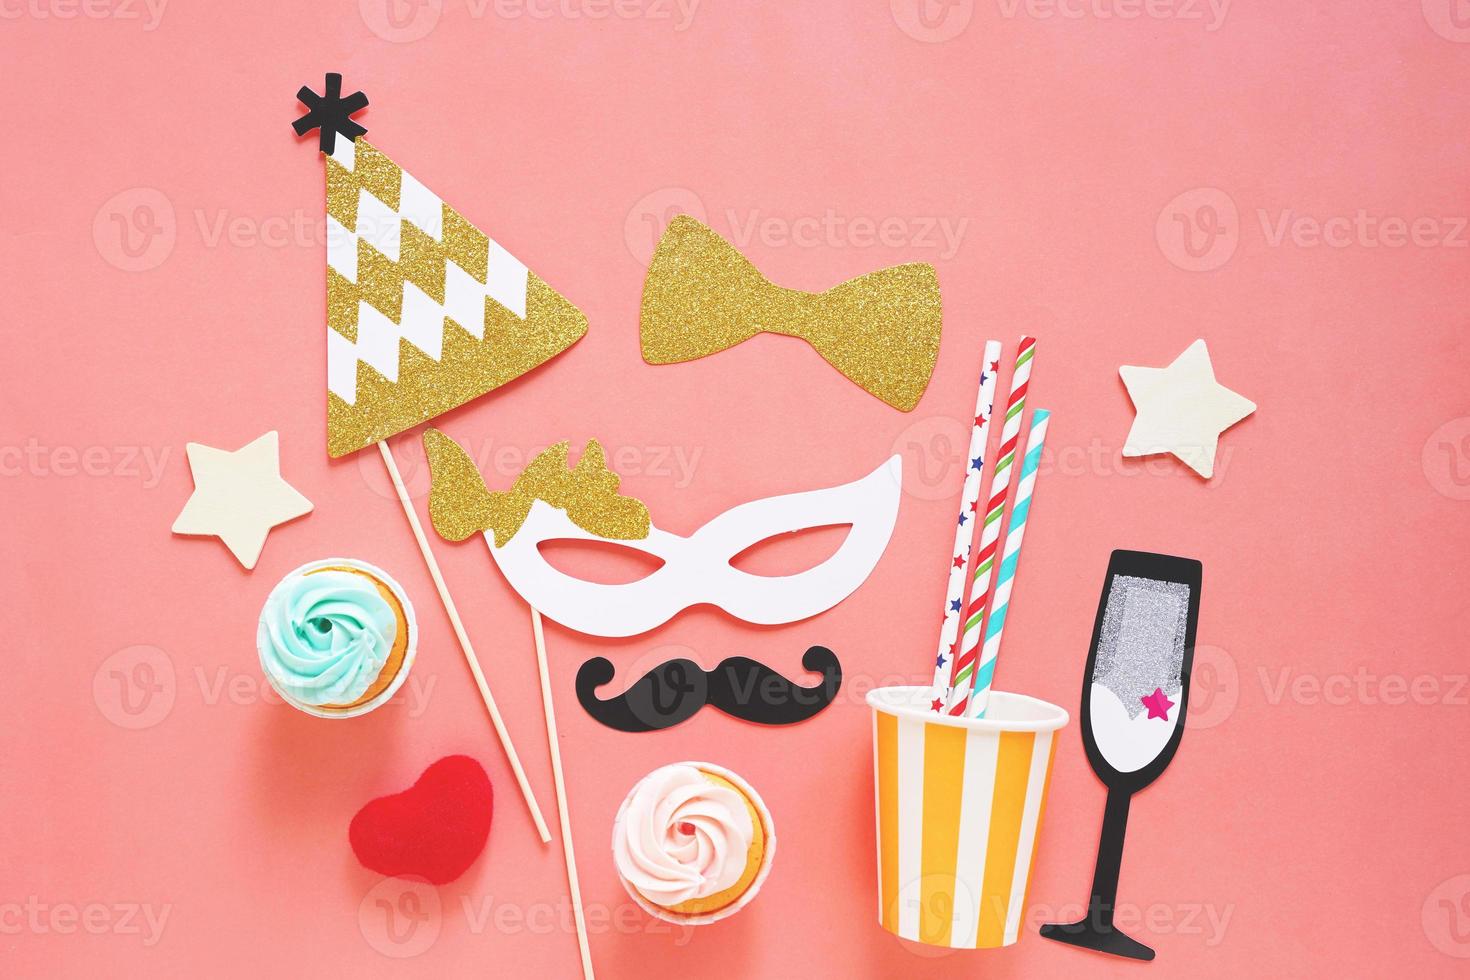 Cute party props, cakes on colorful background, happy new year party celebration and holiday concept photo